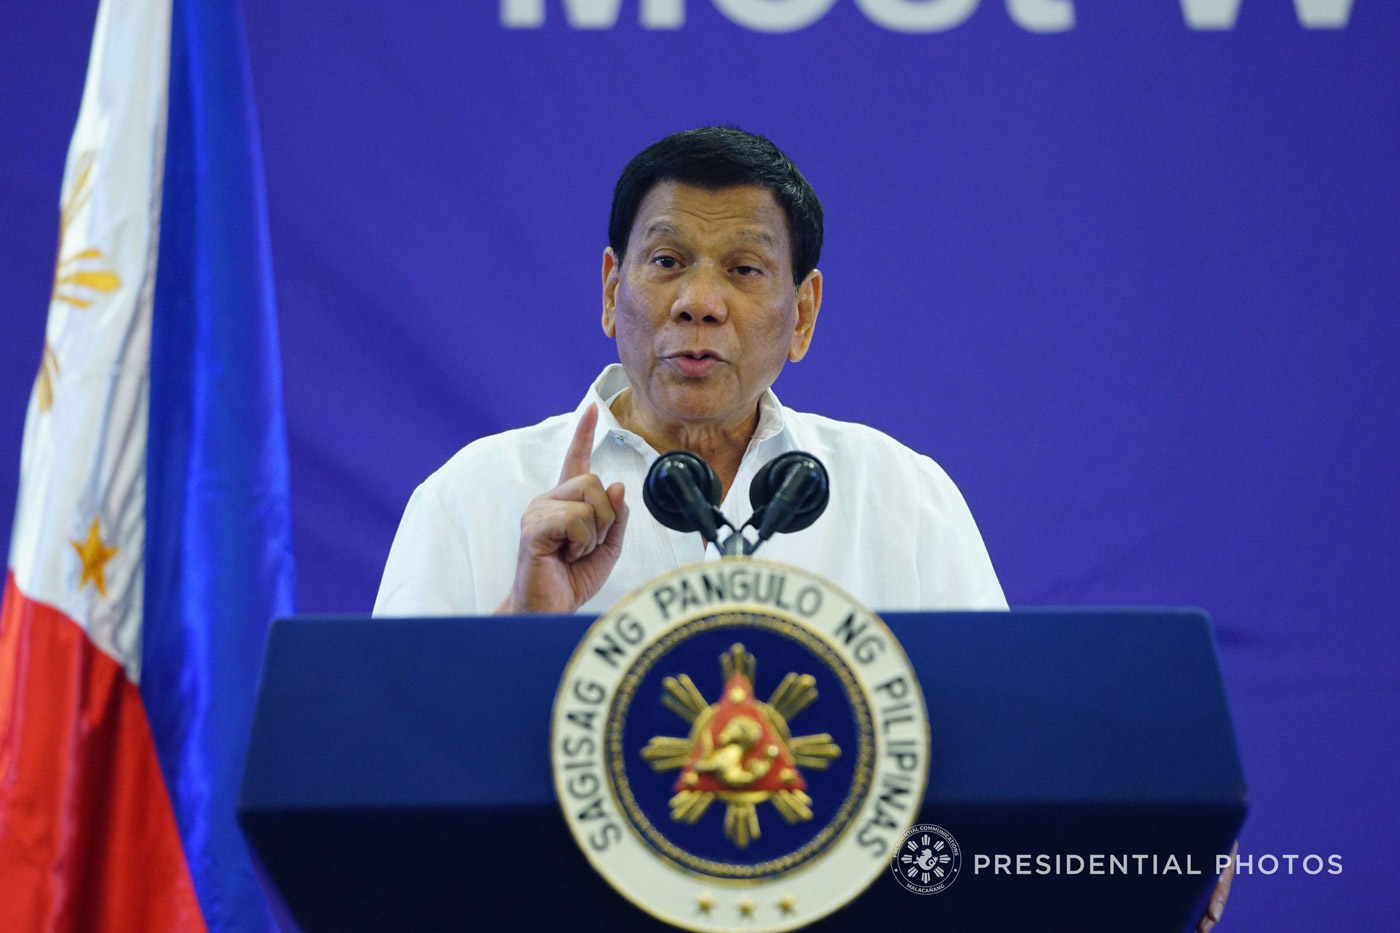 'COME HOME.' In his arrival speech on Sunday, April 29, President Rodrigo Duterte calls on Filipino household service workers to 'come home.' He says government will 'do its best to help you return and resettle.' Malacañang file photo  